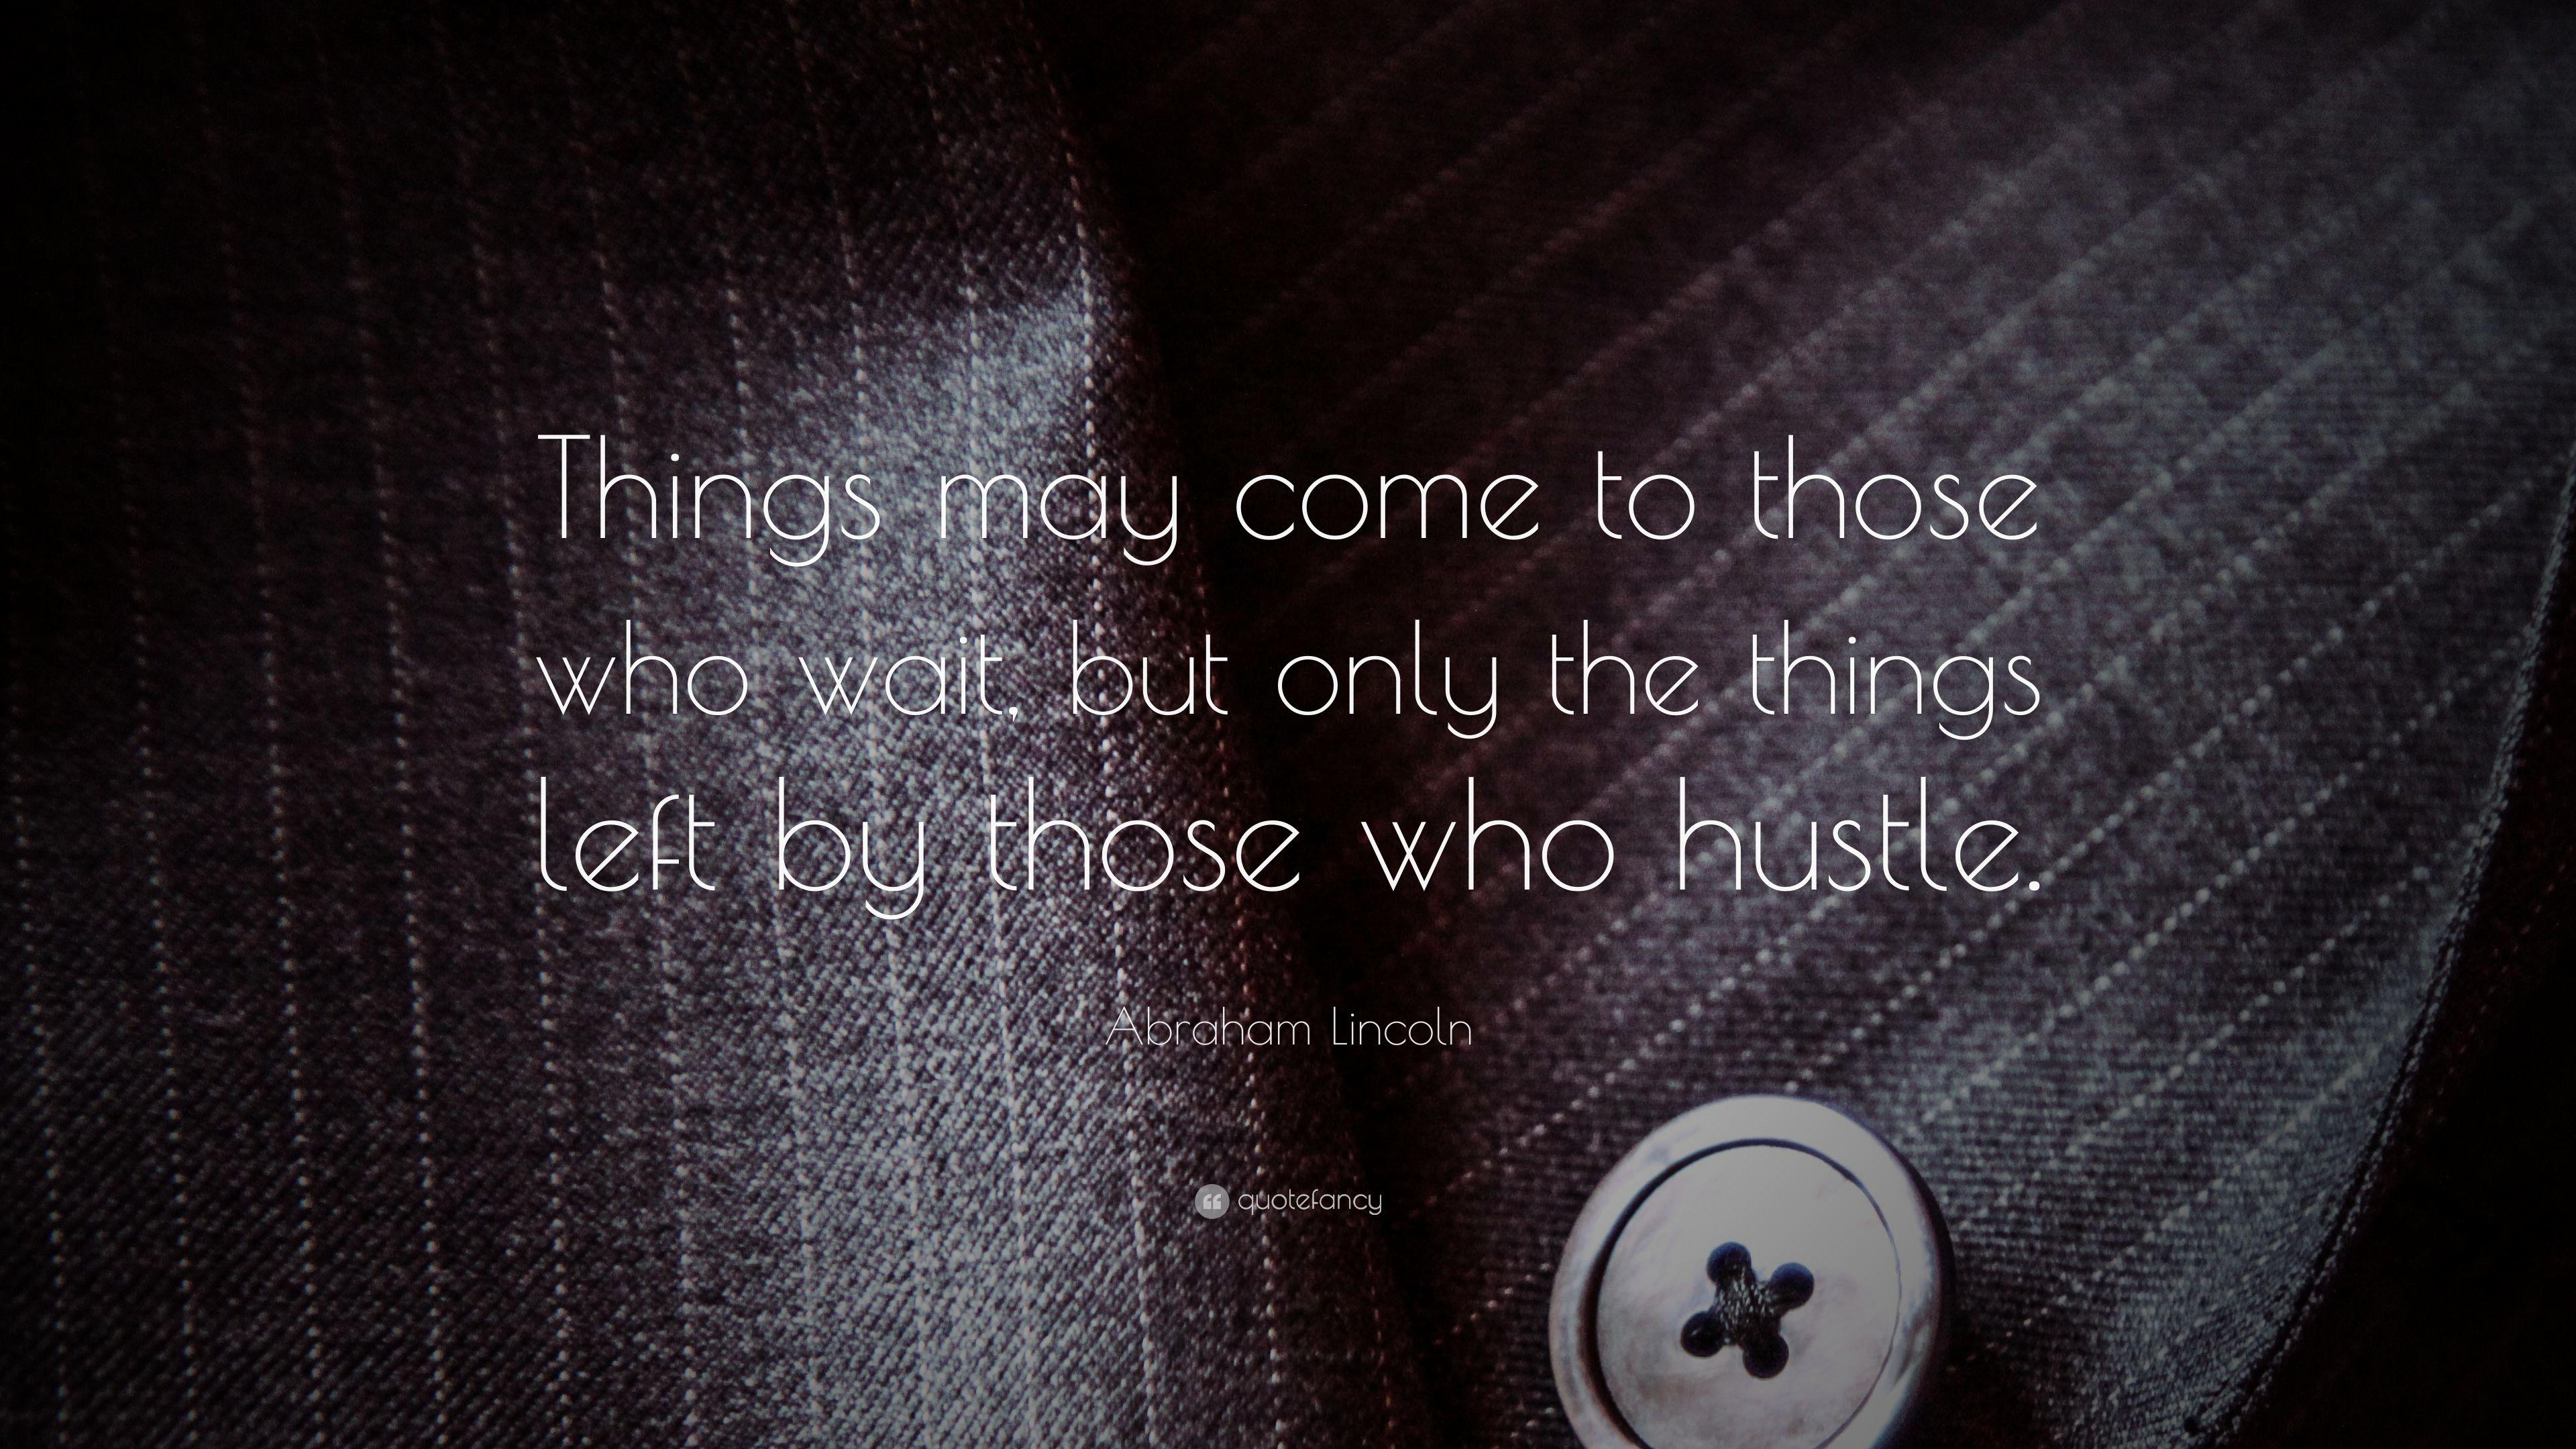 Abraham Lincoln Quote: “Things may come to those who wait, but